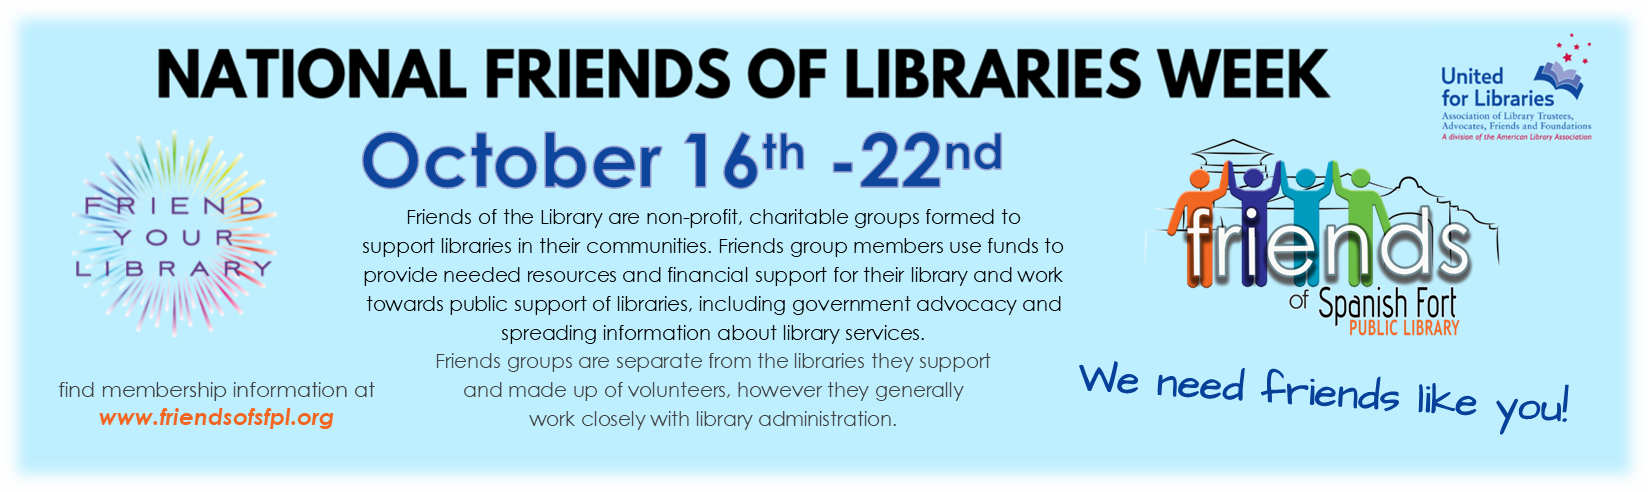 October 16 - 22, 2022 is National Friends of the Library Week 2022. \Click on this image to get information on how you can become a member of the Friends of SFPL